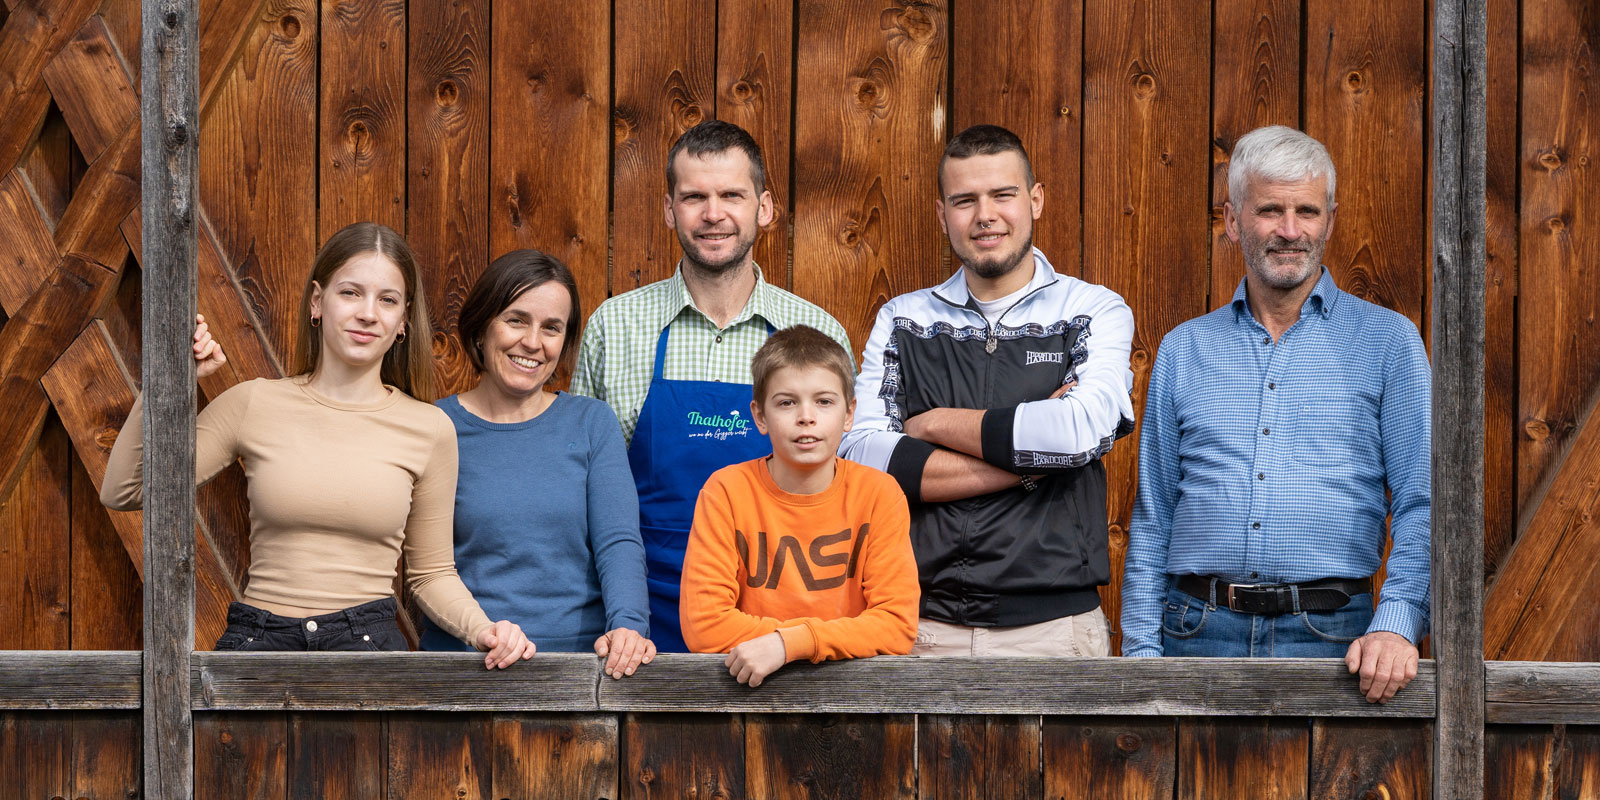 Family Obrist from Thalhofer farm in Lazfons